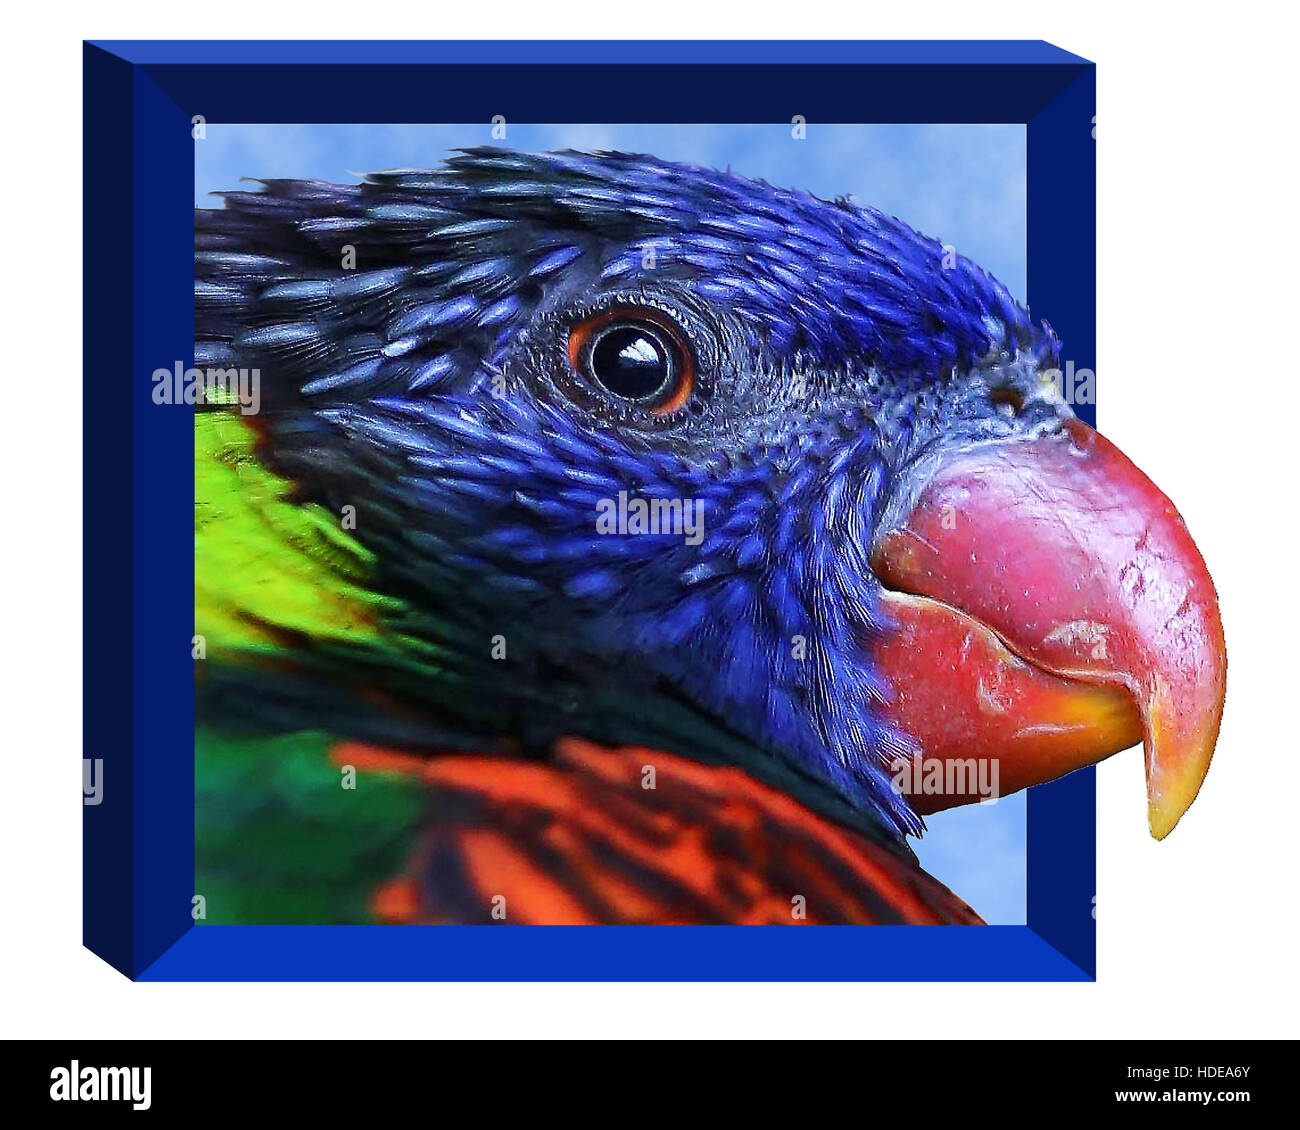 A lorikeet seems to pop out of this digital frame. The colorful bird is isolated on a white background Stock Photo